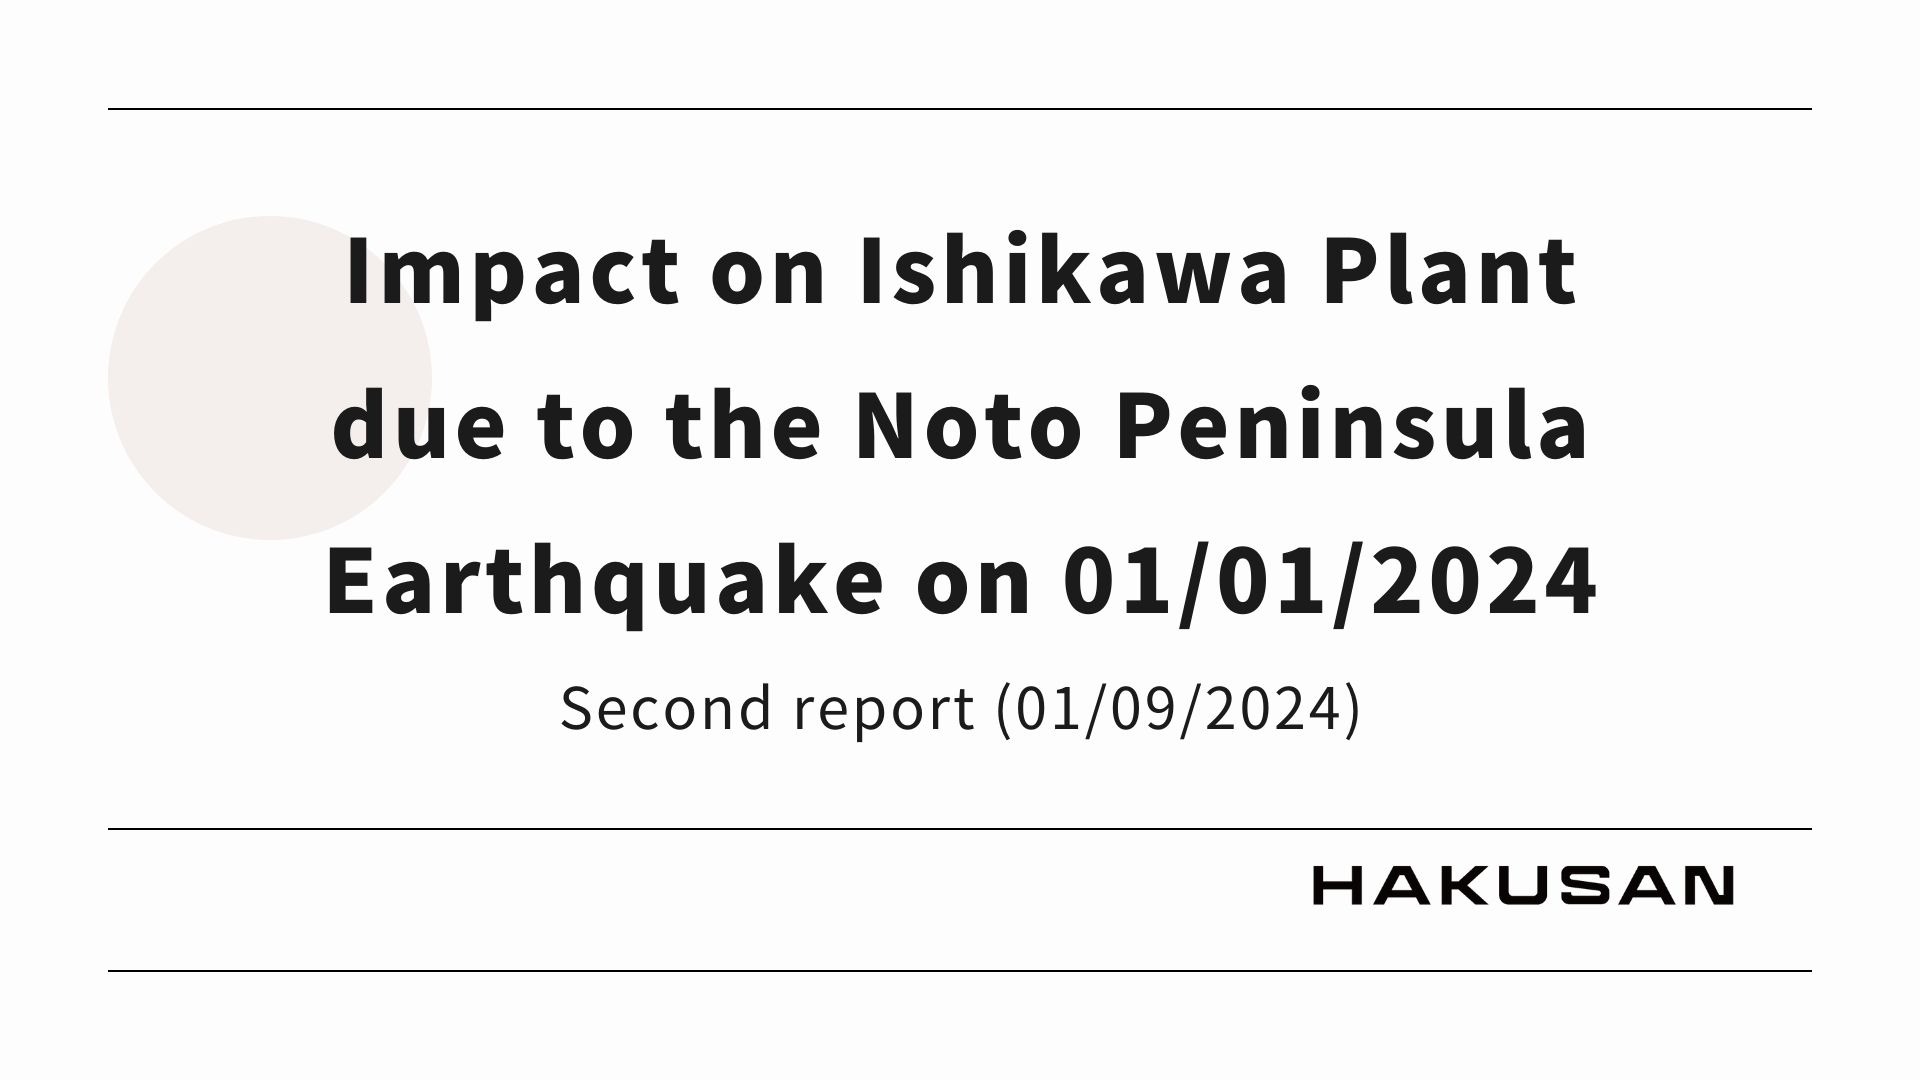 The impact of the 2024 Noto Peninsula Earthquake on the Ishikawa factory (second report_as of January 9, 2024)